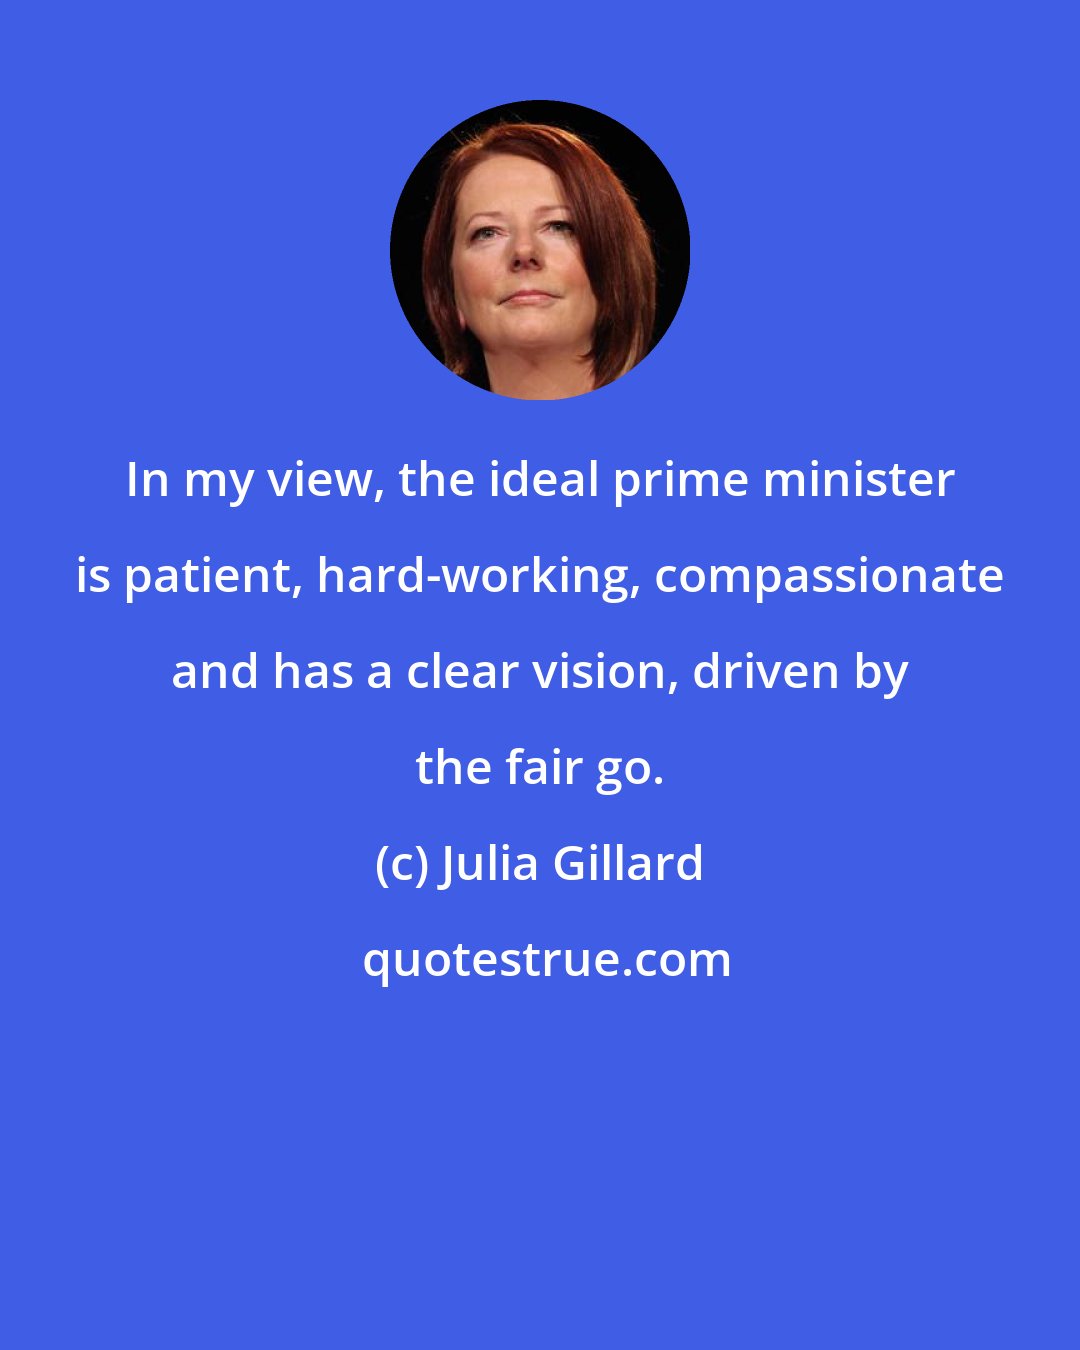 Julia Gillard: In my view, the ideal prime minister is patient, hard-working, compassionate and has a clear vision, driven by the fair go.